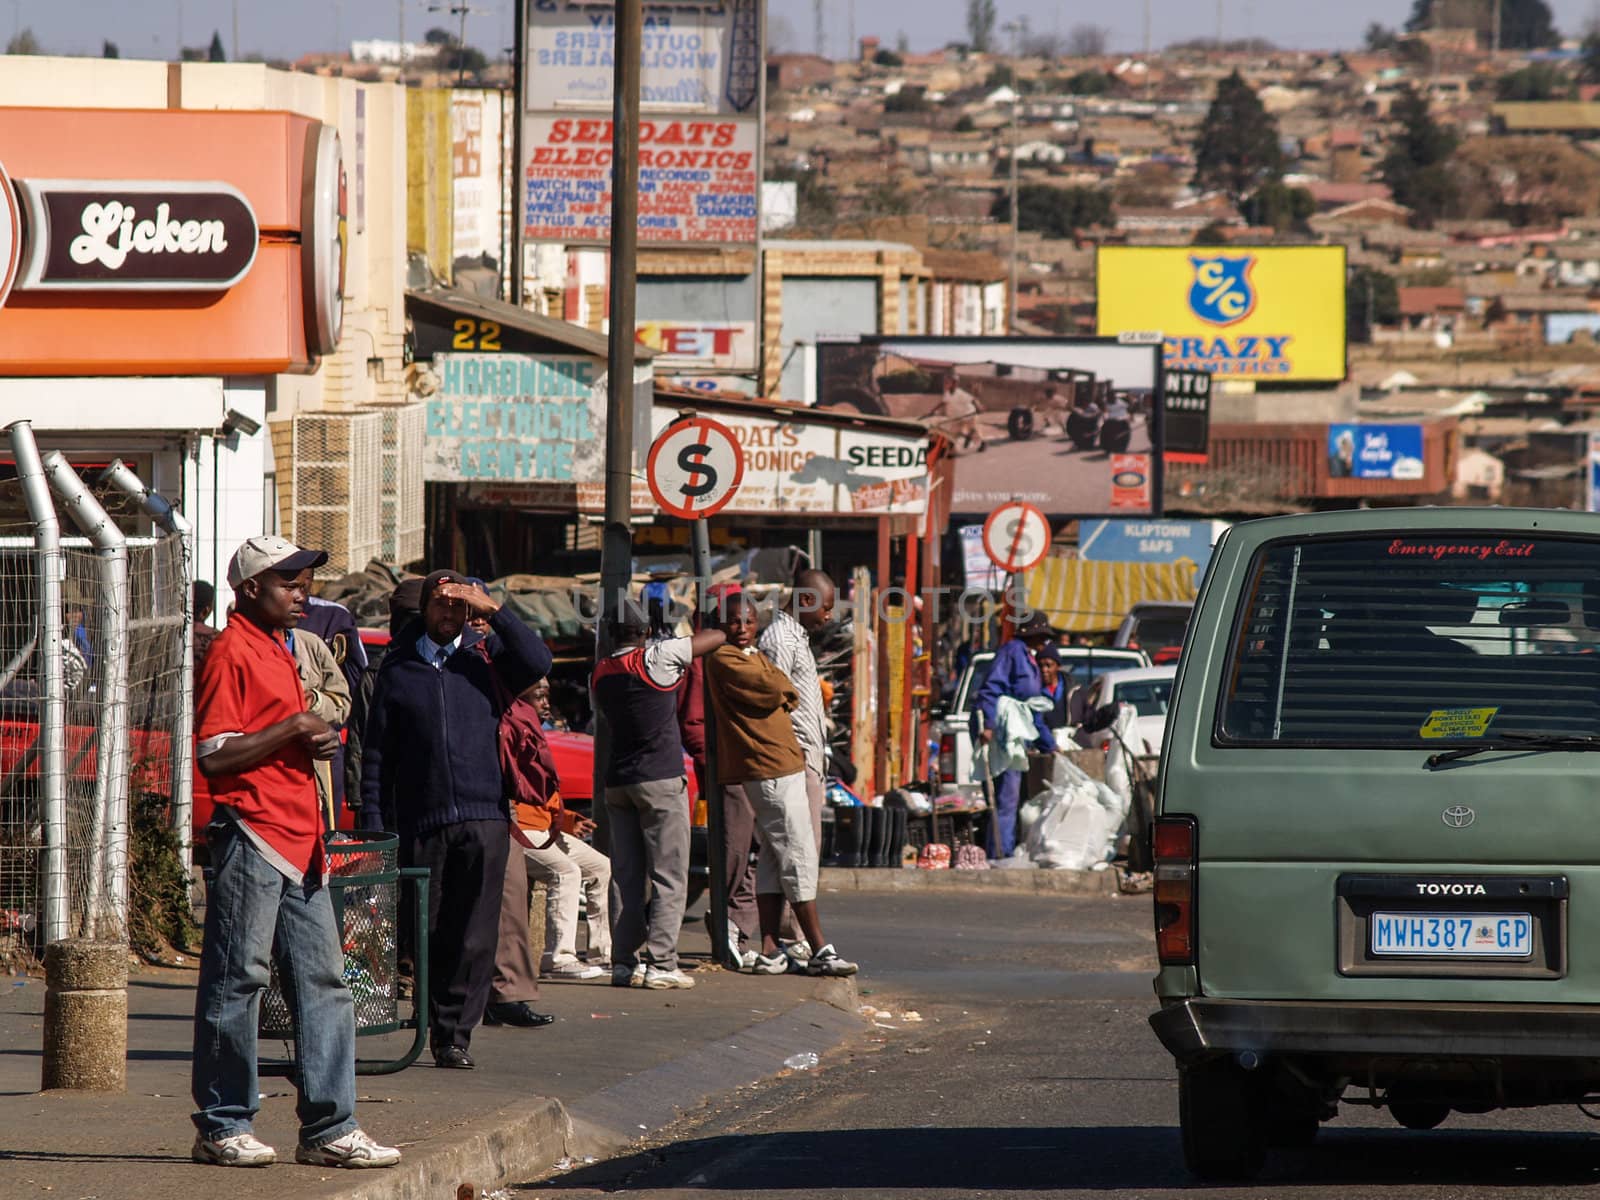 Soweto street scene, showing people and the housing background.